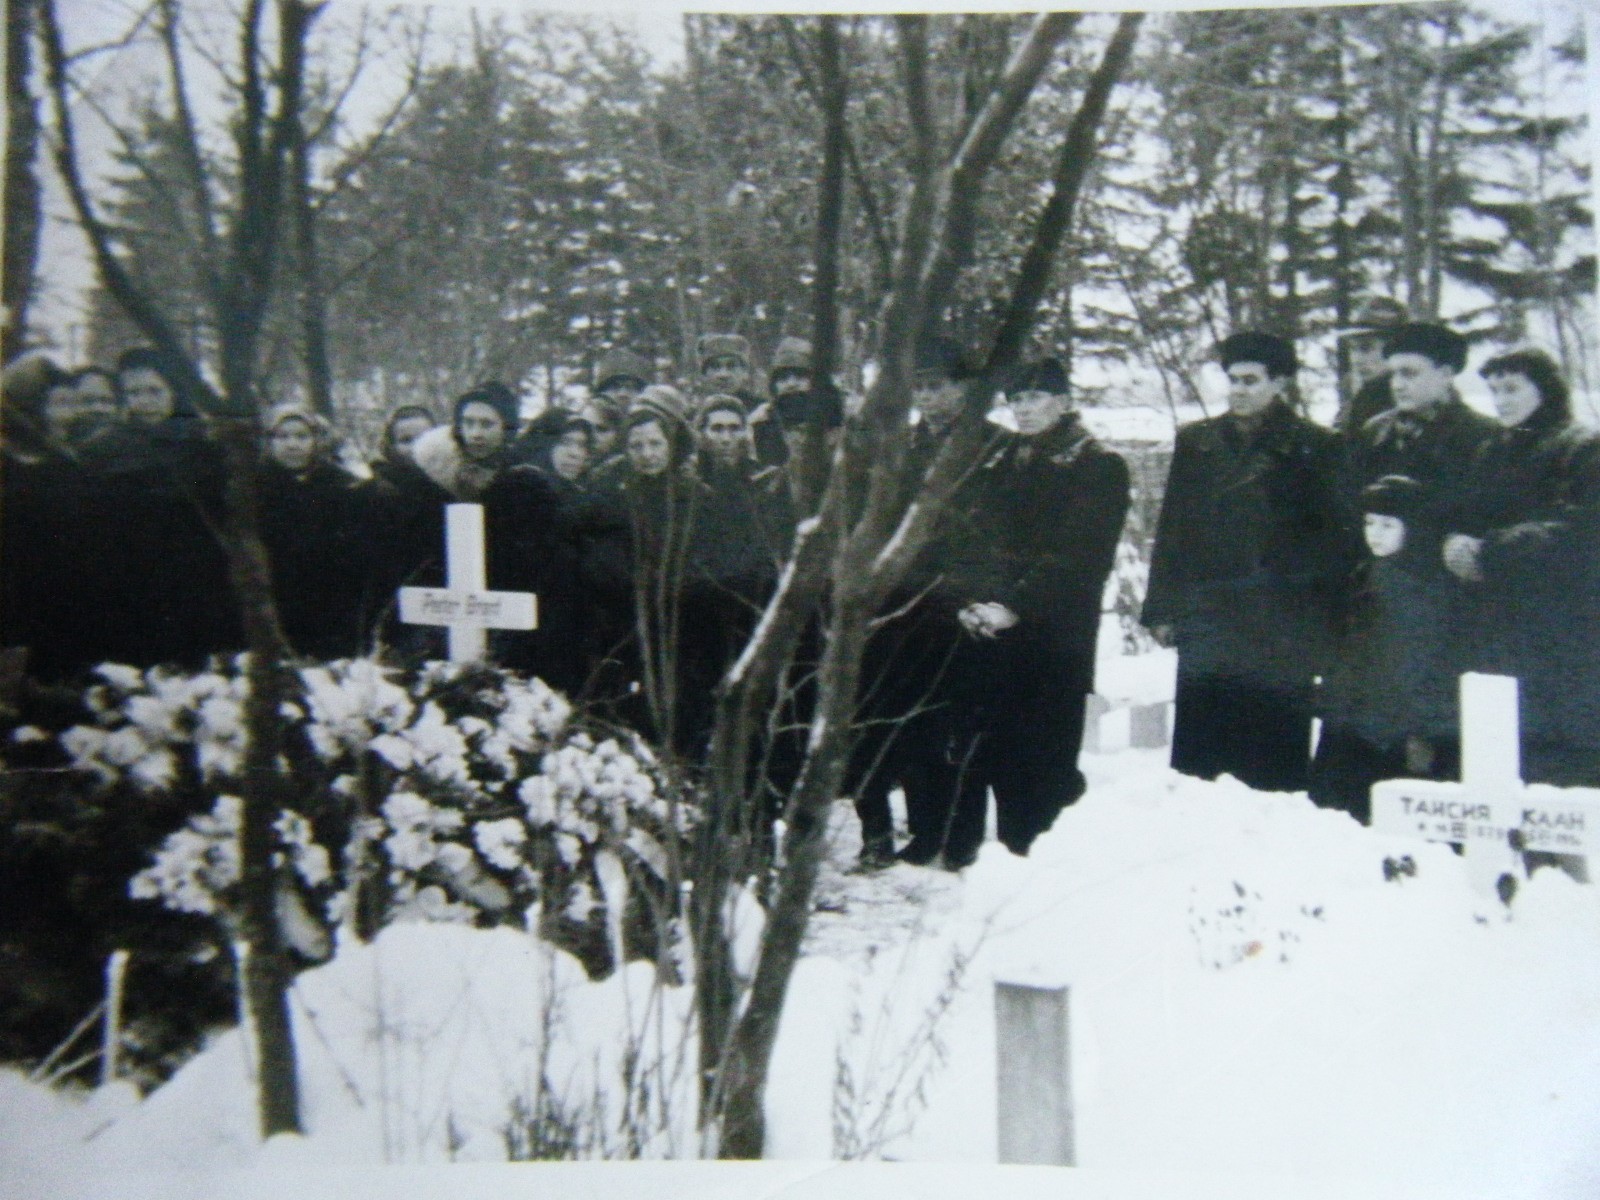 The funeral of Peter Brant in Tartu in Paul's graveyard. The third adult uncle's funeral on the right is Endel Aimre(Brant). Peter was also called "Tartu's fear"